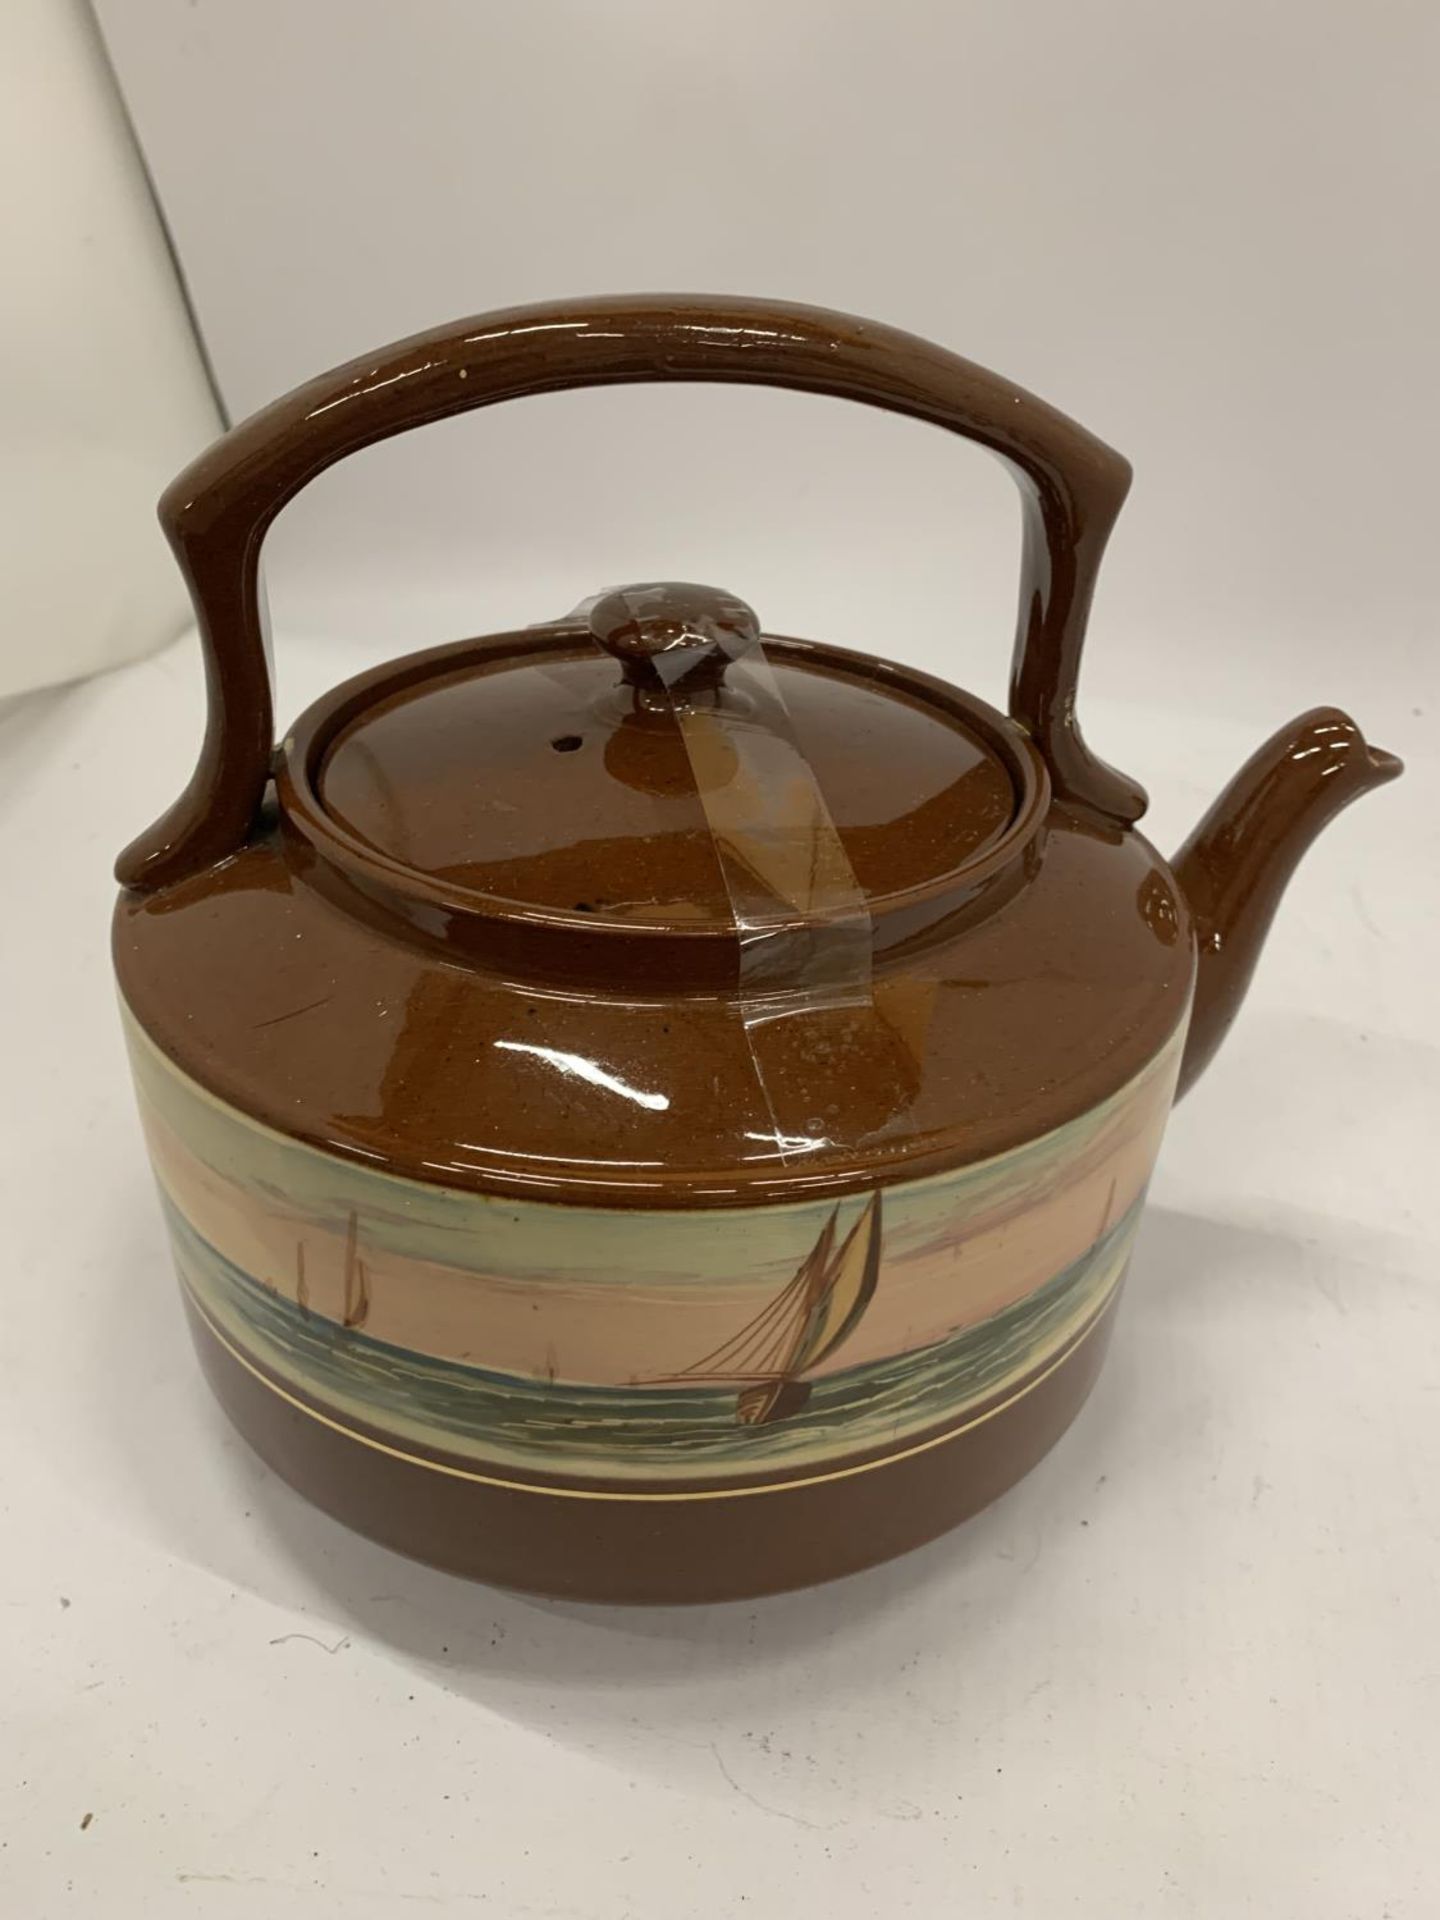 A VINTAGE ROYAL DOULTON STYLE TEAPOT WITH TRANSFER PRINTED FREIZE - Image 6 of 8